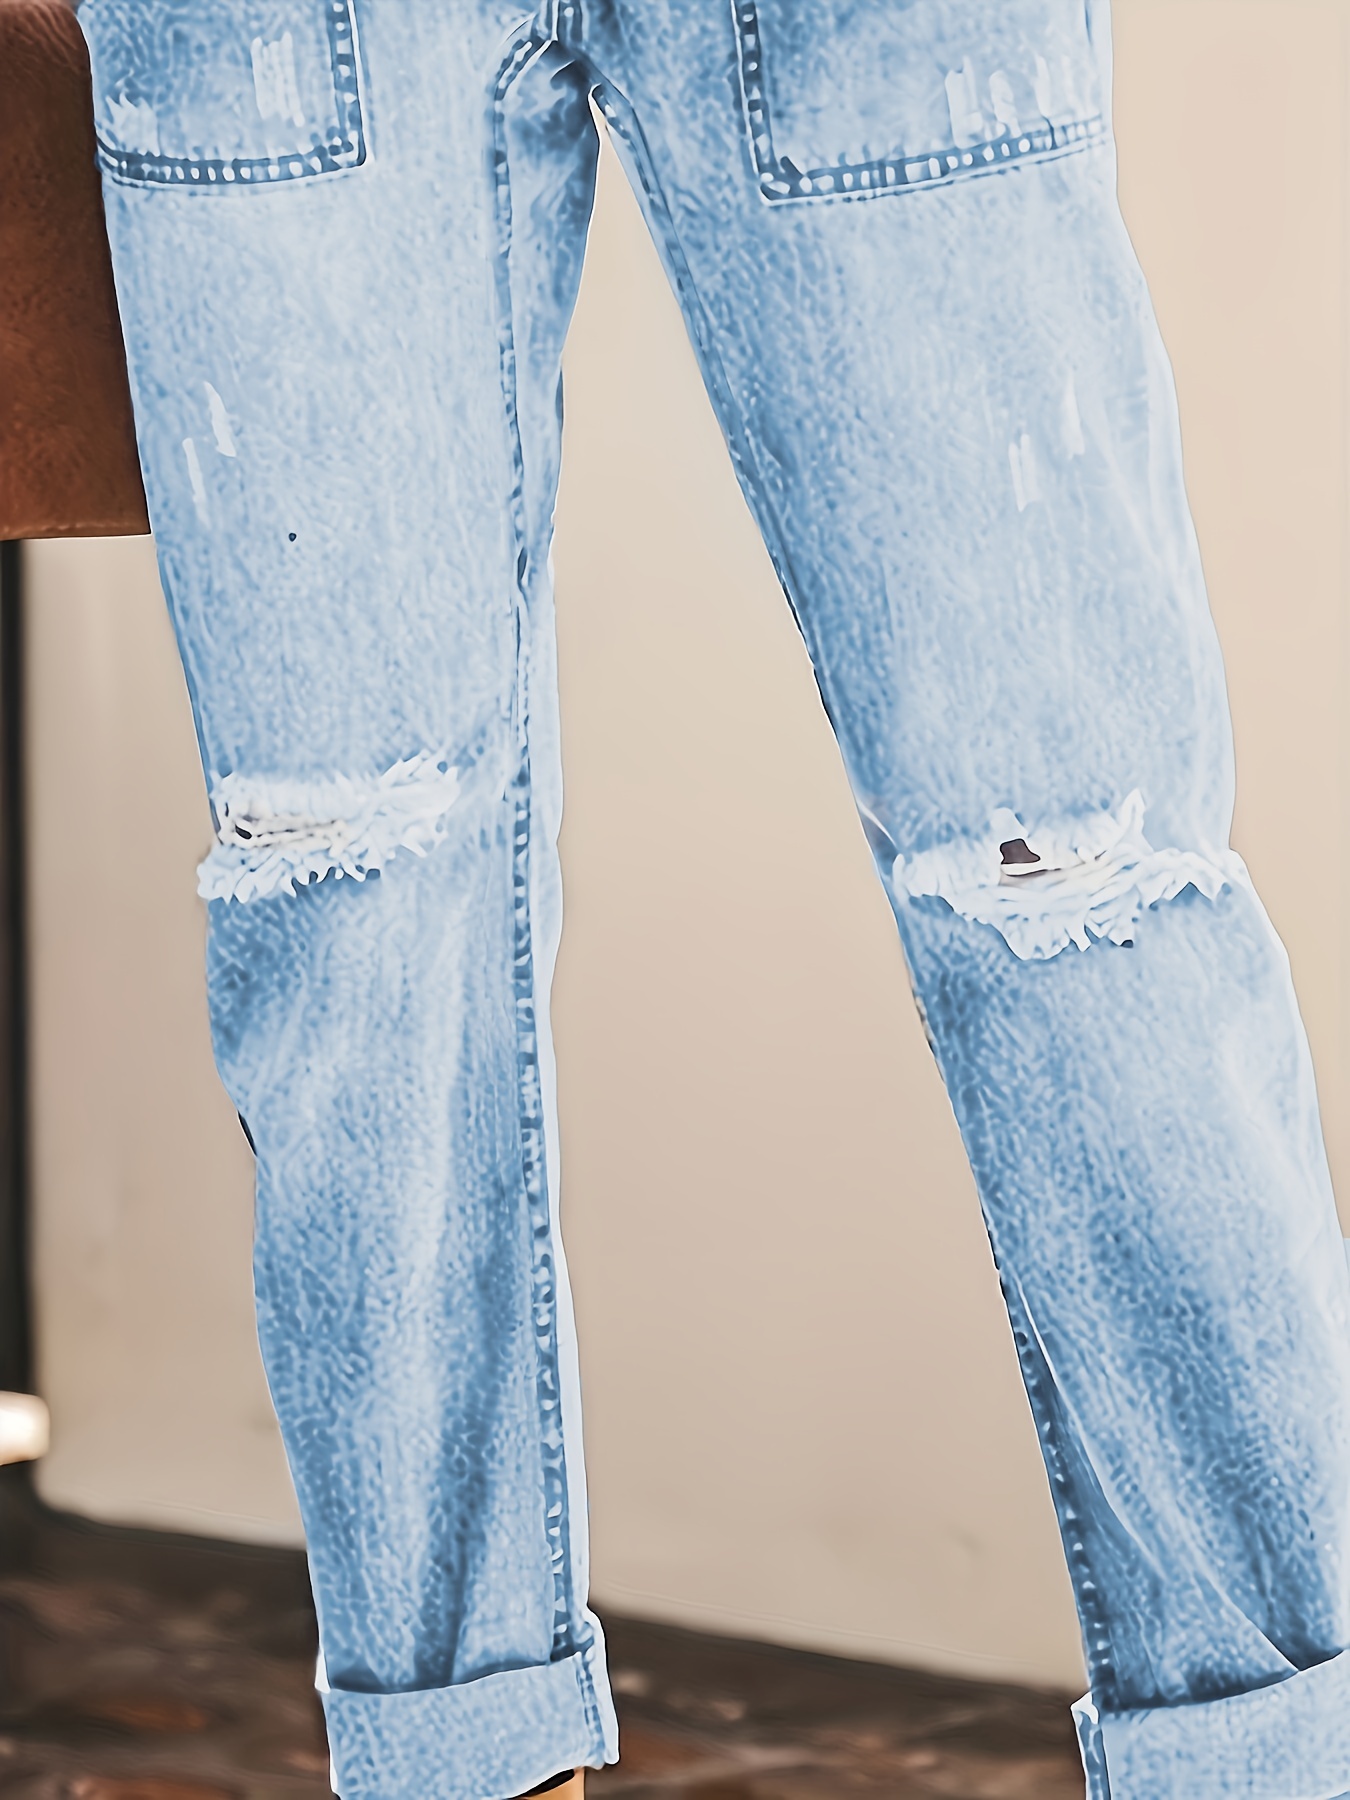 RIPPED JEANS WITH PATCHES - Light blue